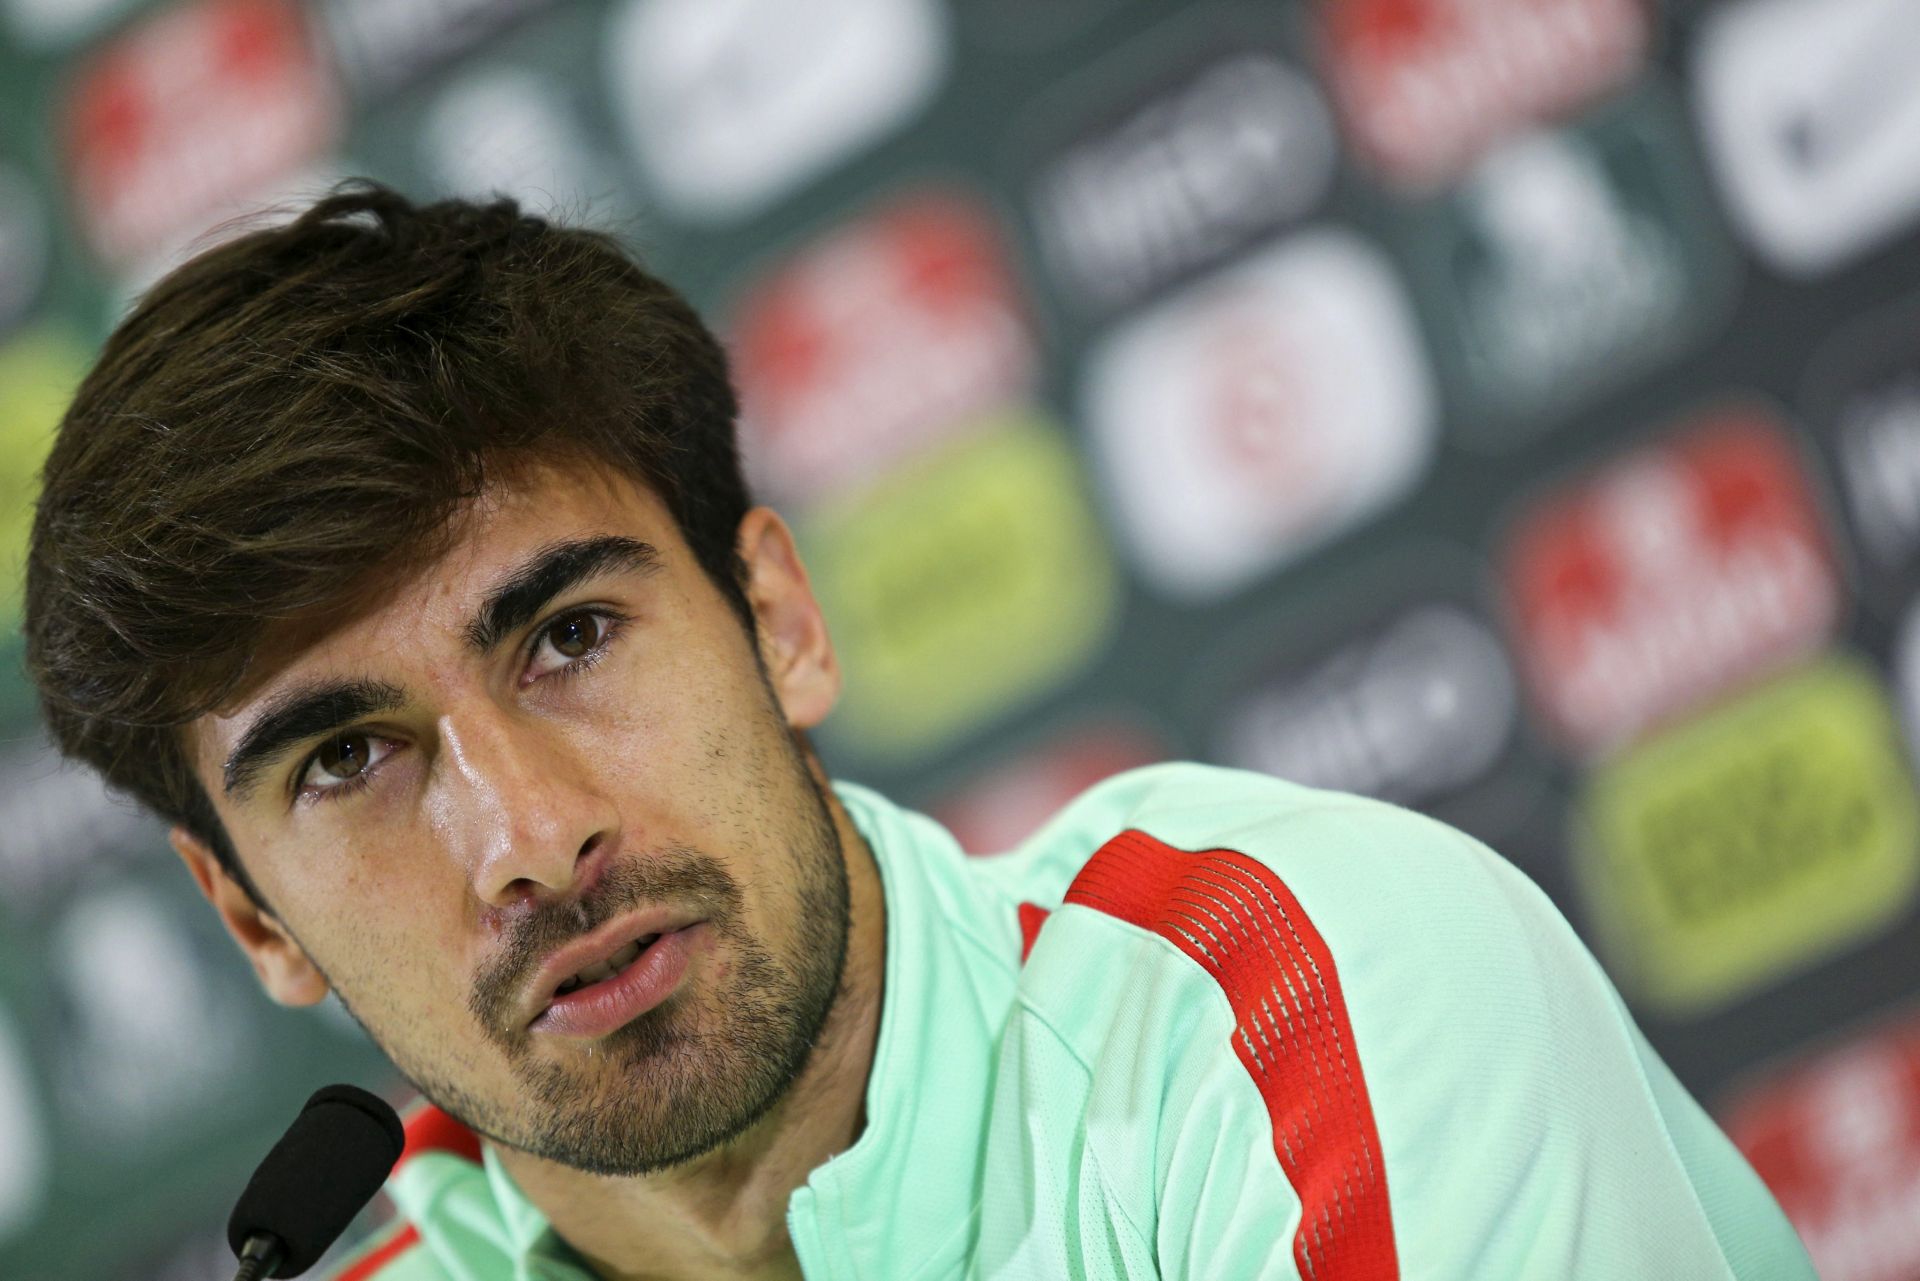 epa05406856 Portugal's Andre Gomes during a press conference at the French national rugby team's camp in Marcoussis near Paris, France, 04 July 2016. Portugal will face Wales in a UEFA EURO 2016 semi-finals match in Lyon on 06 July 2016.  EPA/MIGUEL A. LOPES